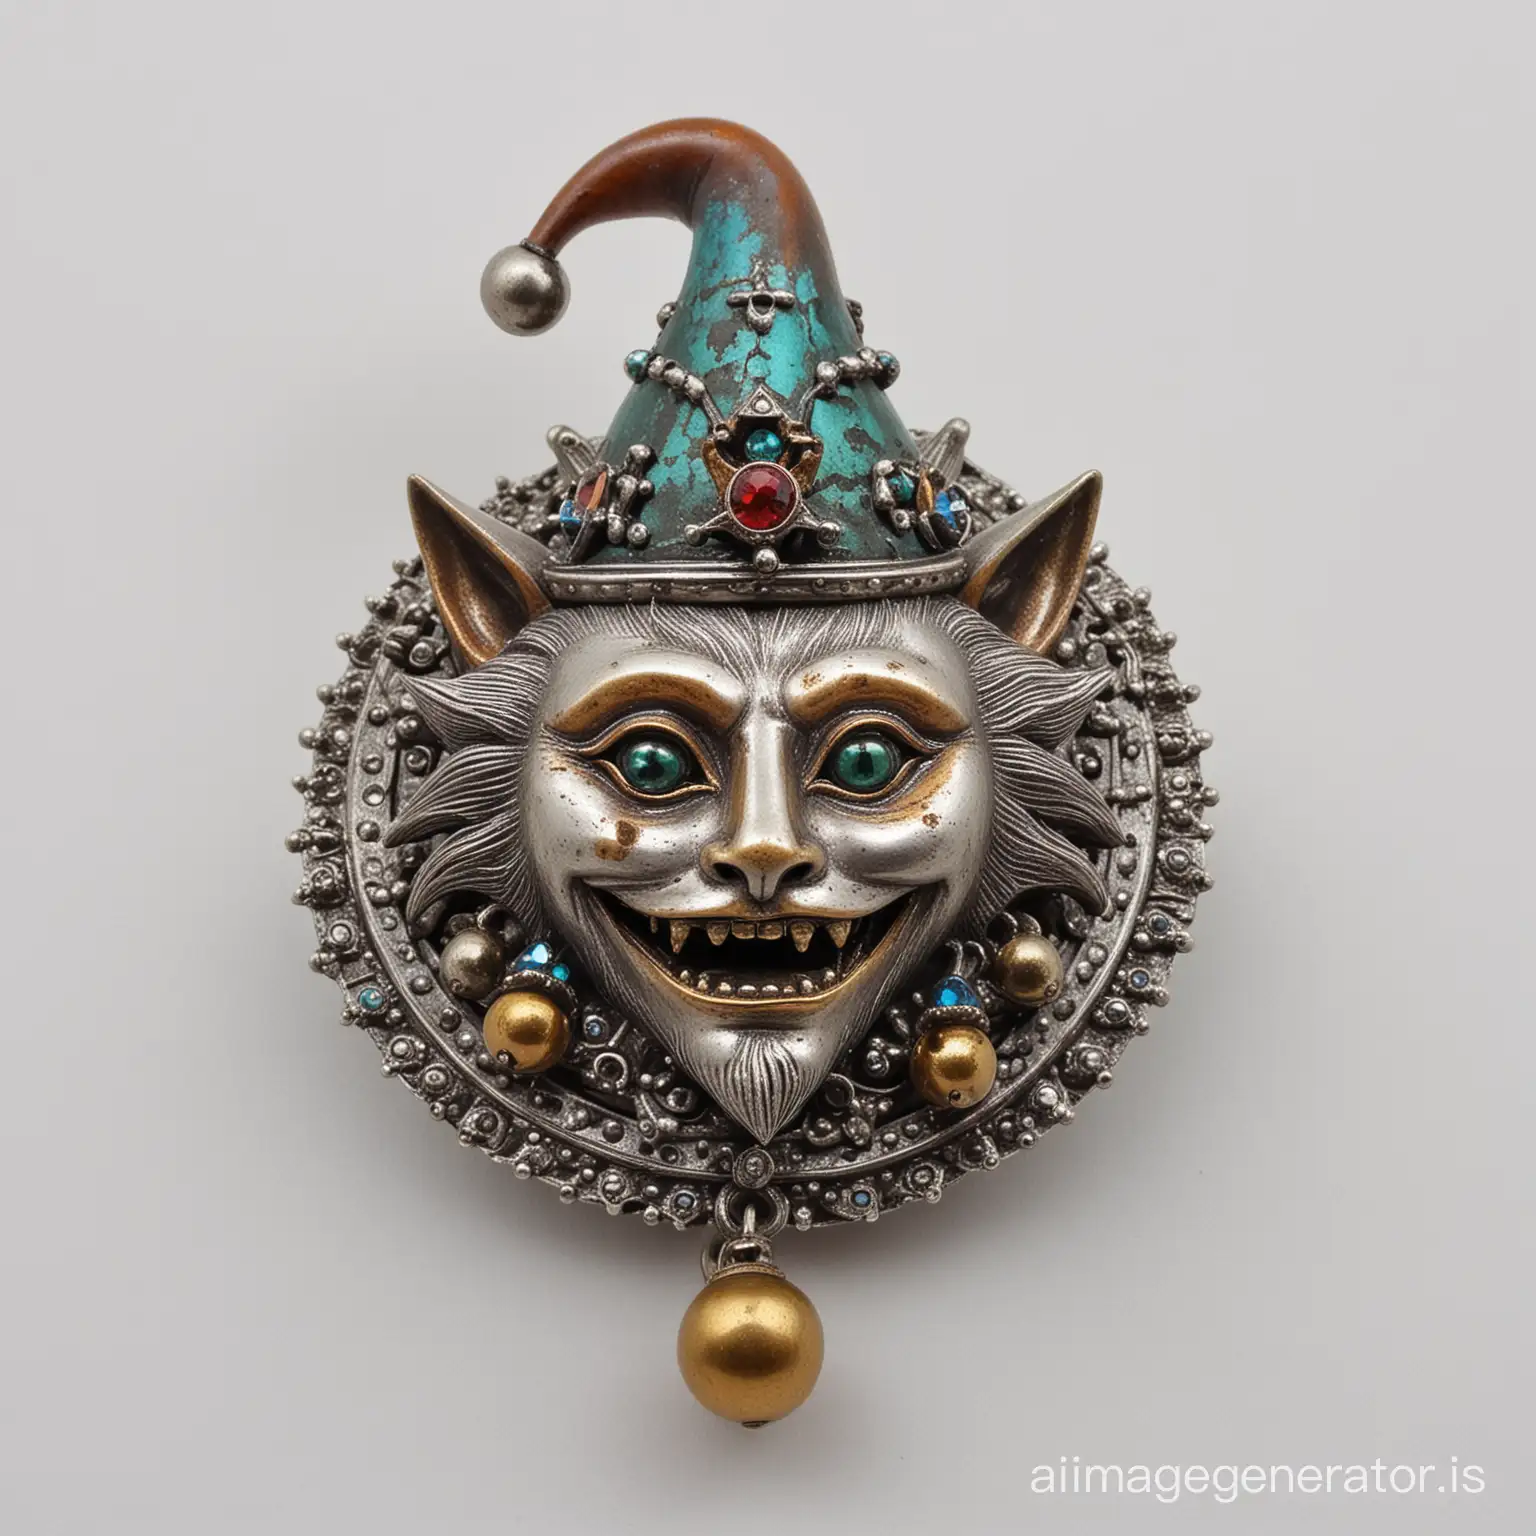 Patinated, Bejewelled, medieval brooch featuring a mad cat's face wearing a jester's hat with bells as king in old silver and bronze on a white background